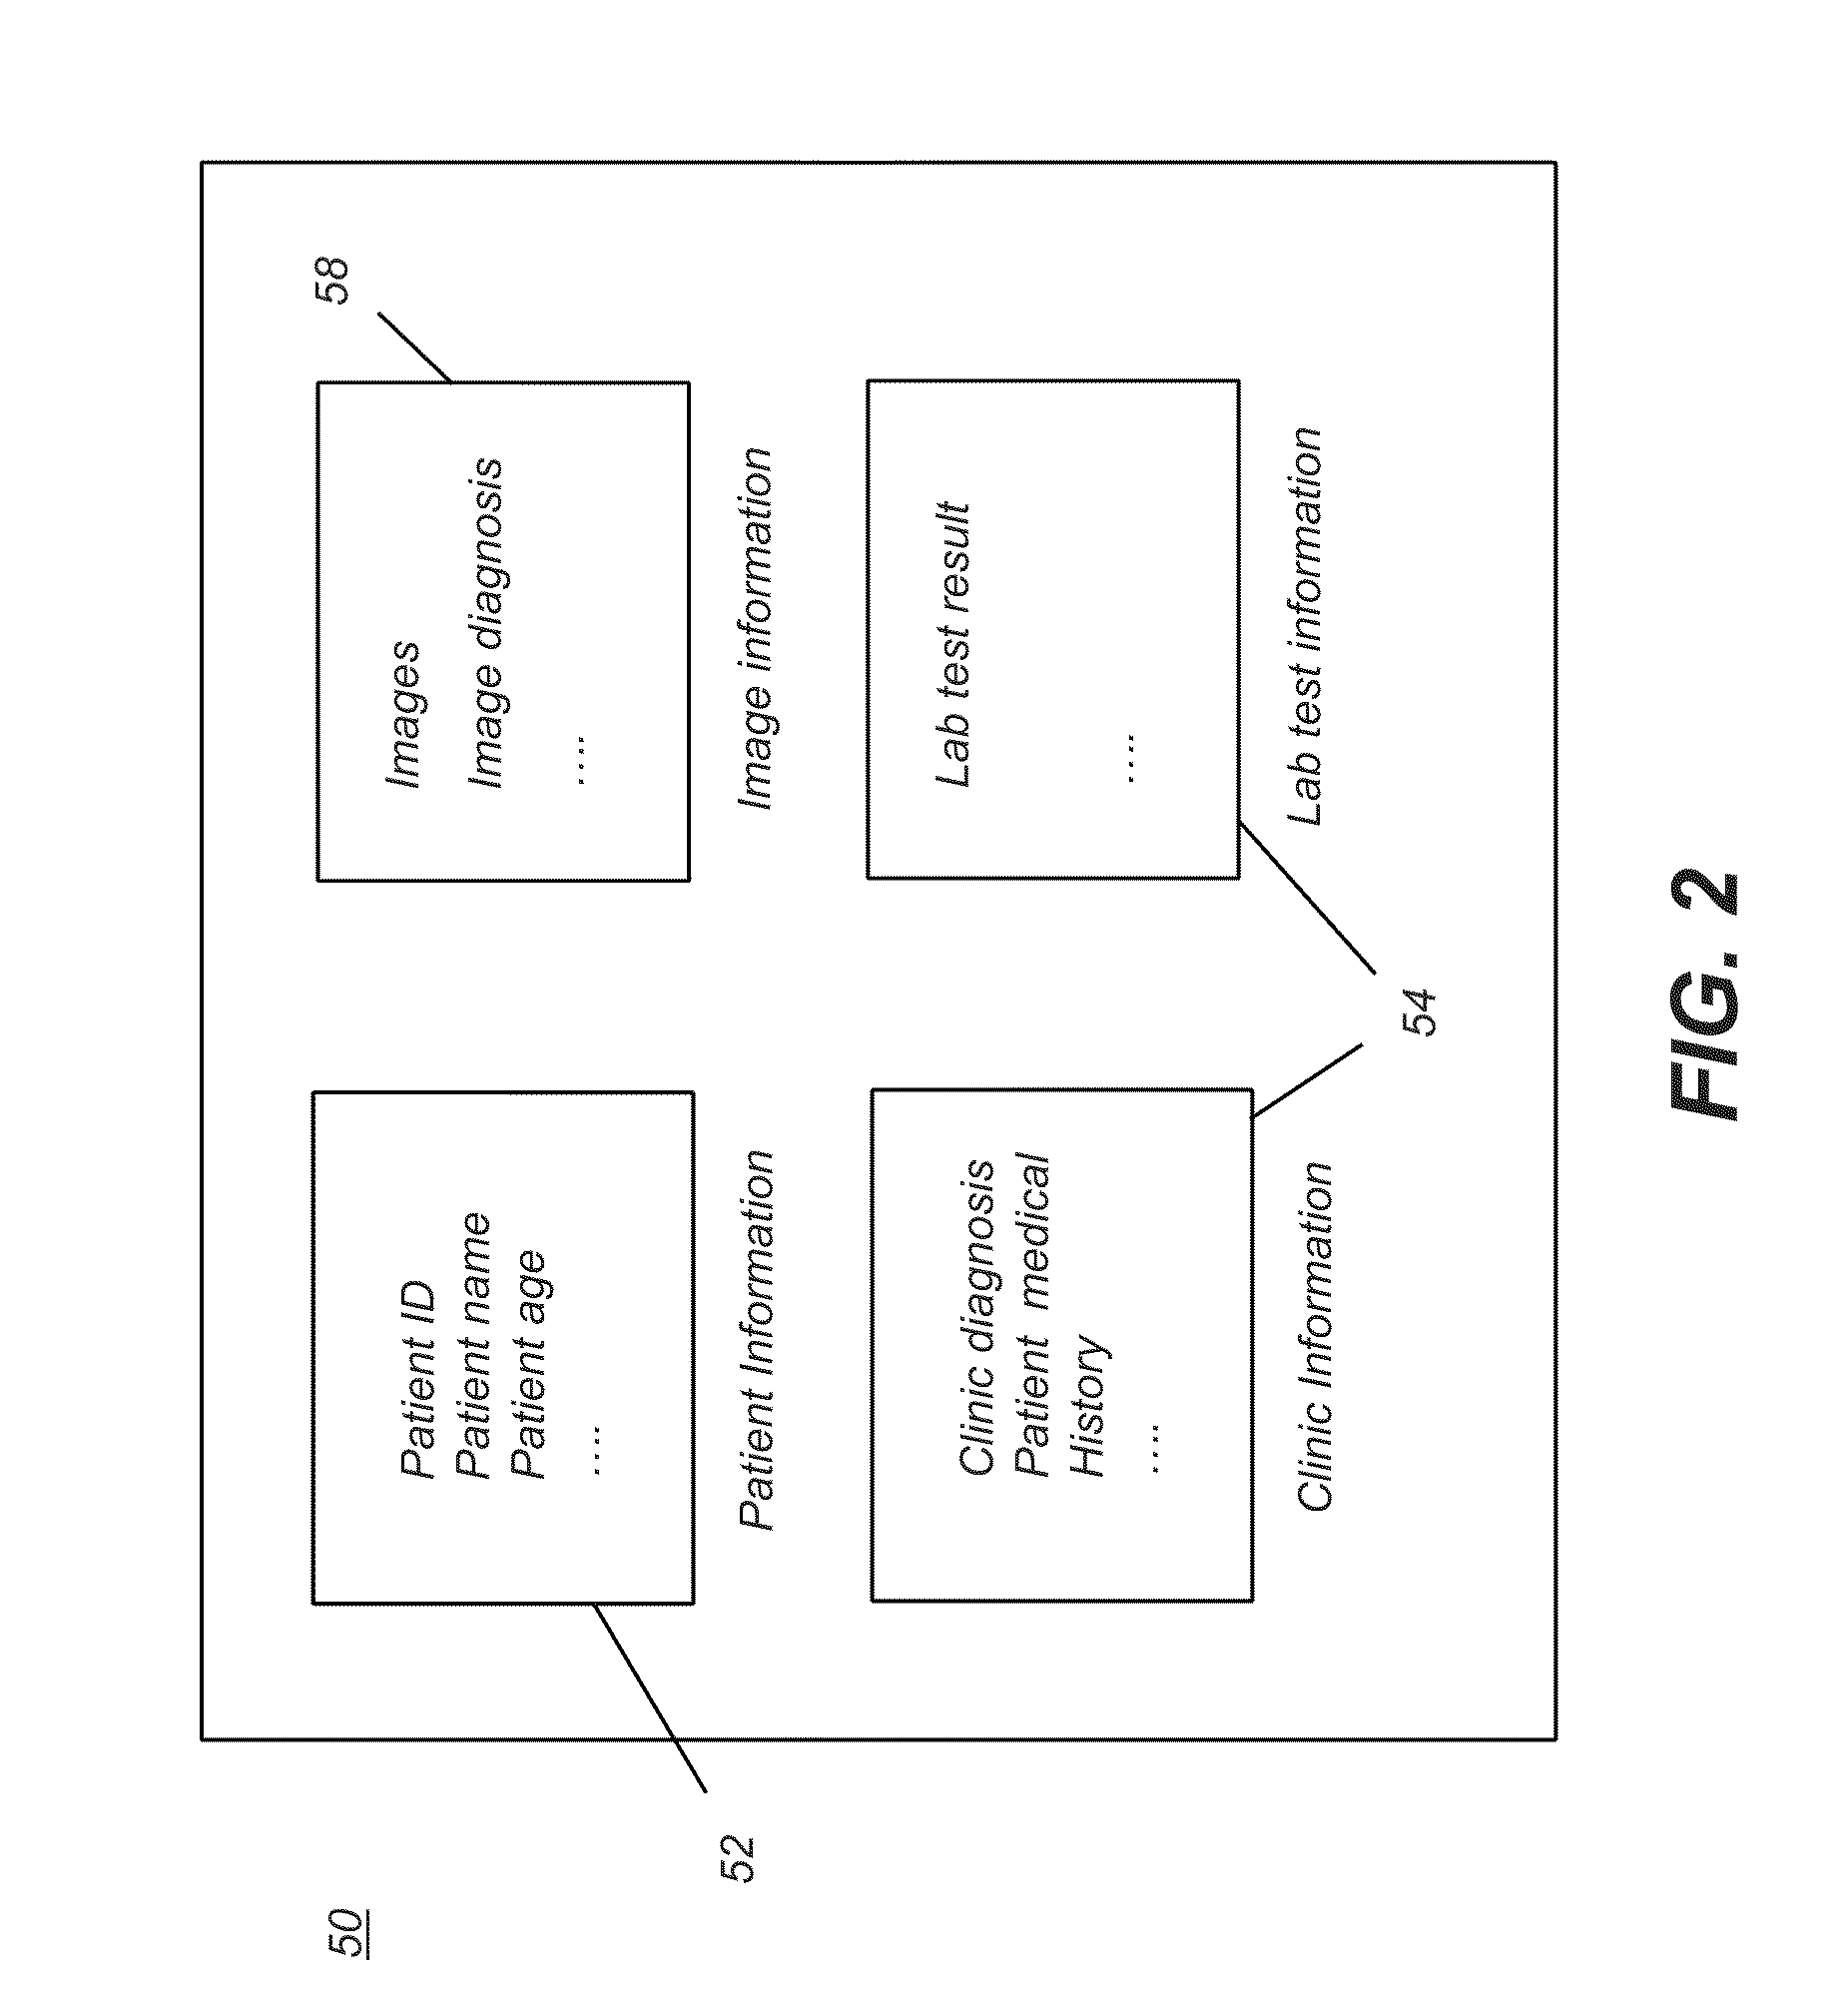 System and method for discovering image quality information related to diagnostic imaging performance